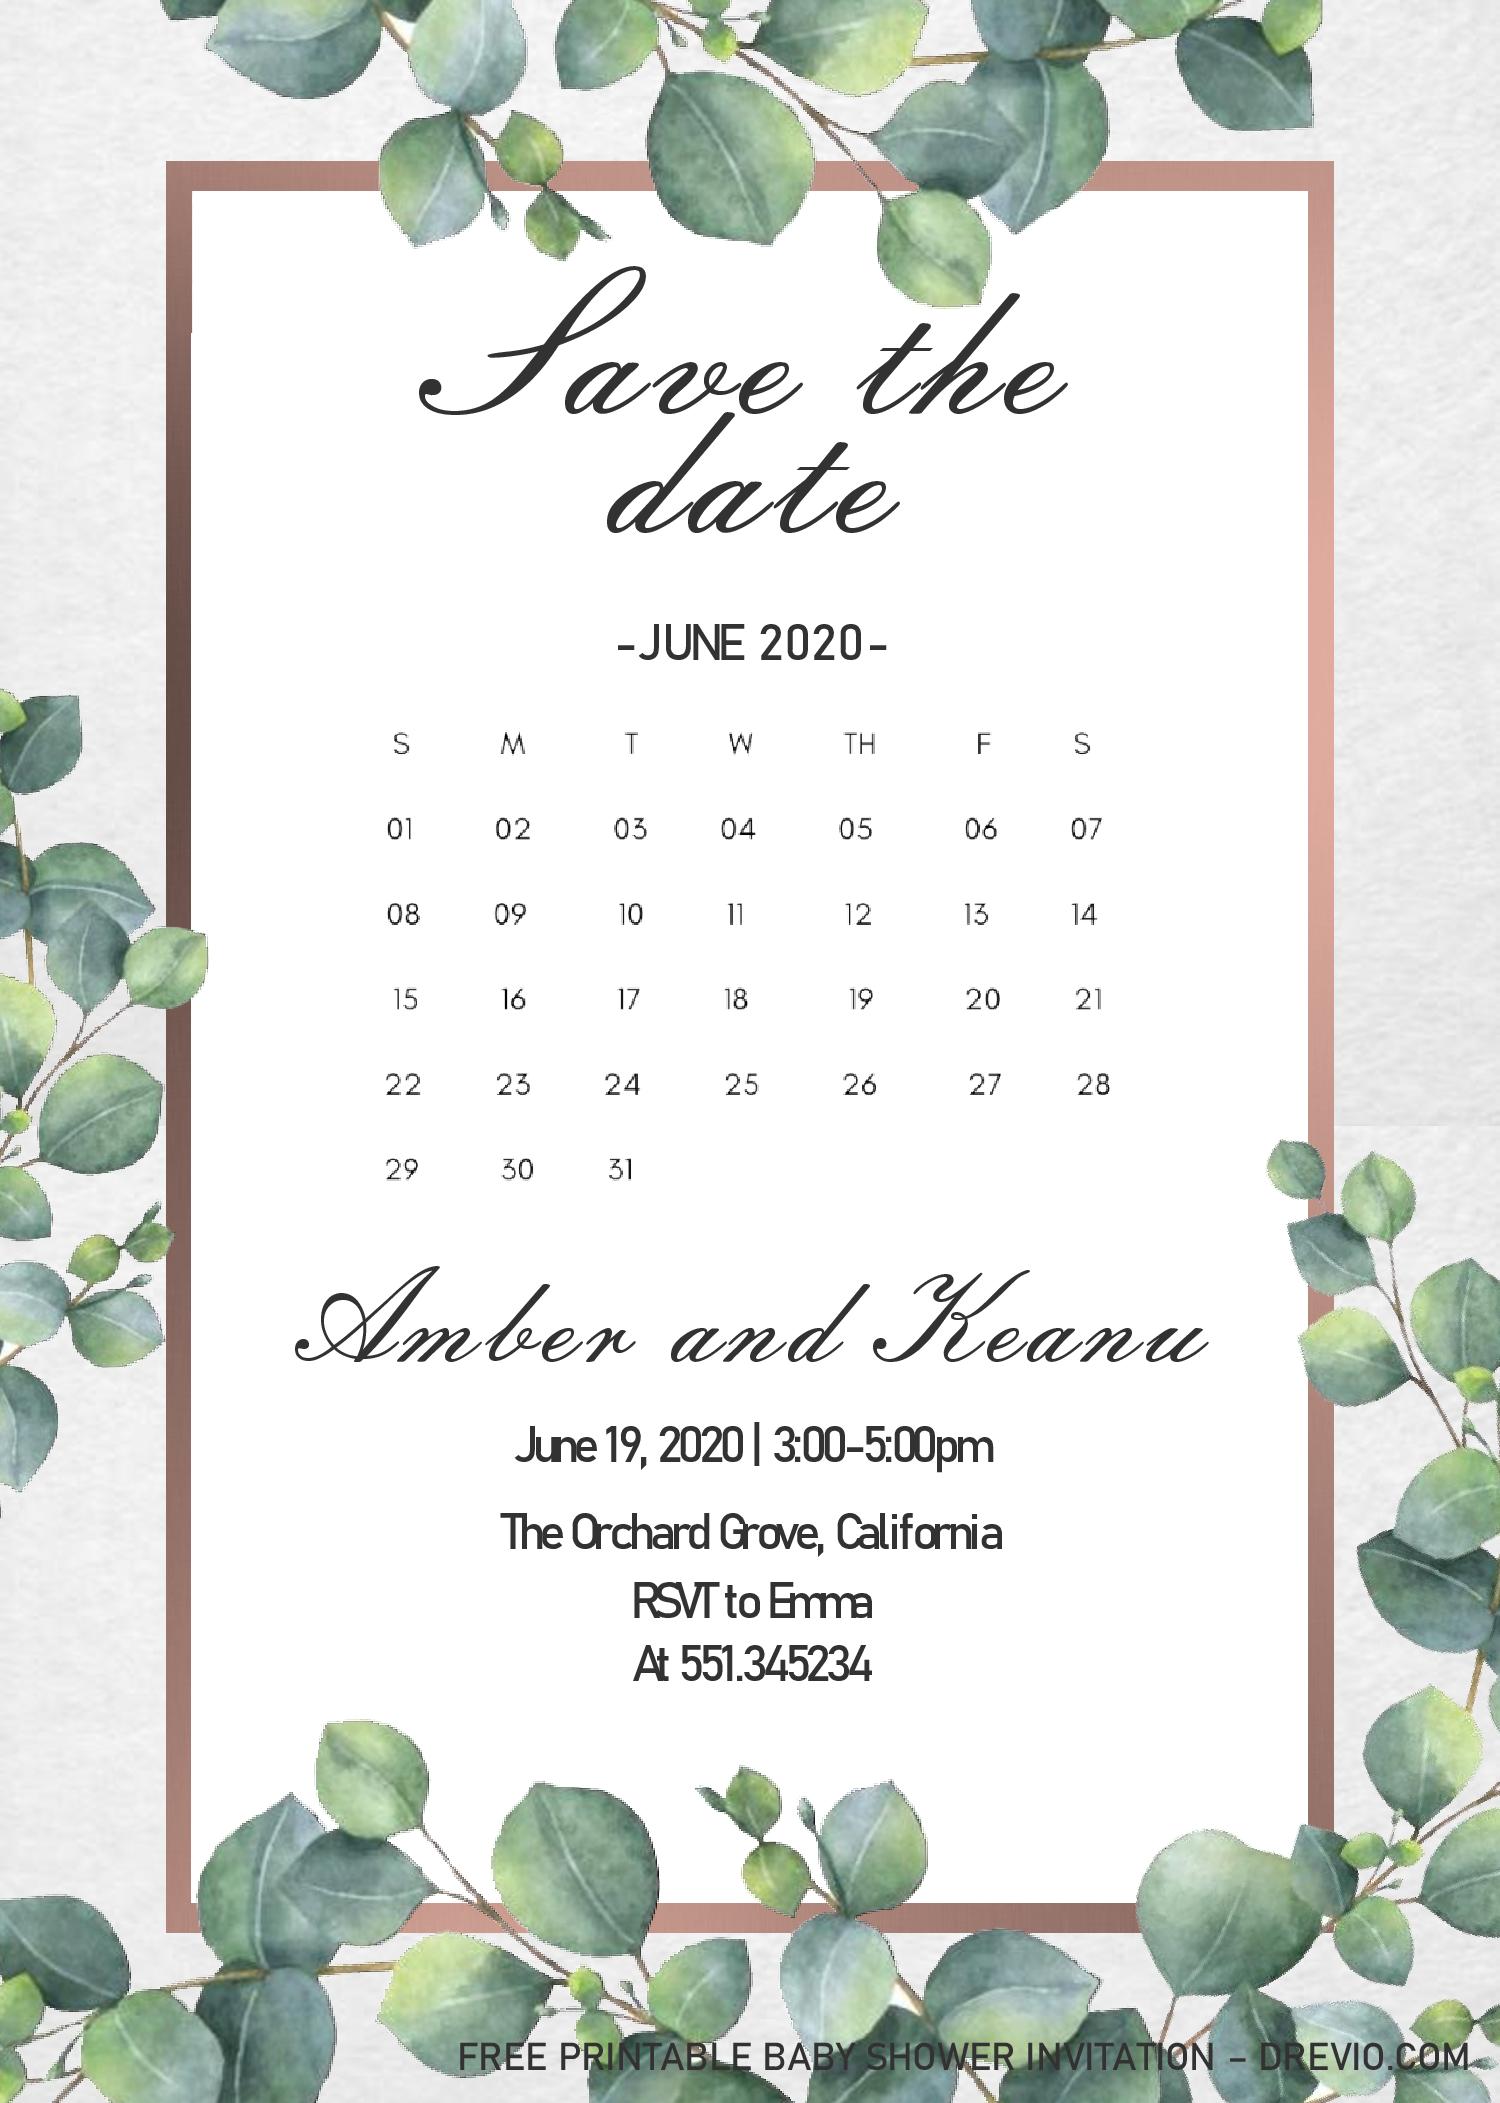 Save The Date F Download Hundreds Free Printable Birthday Invitation Templates Media